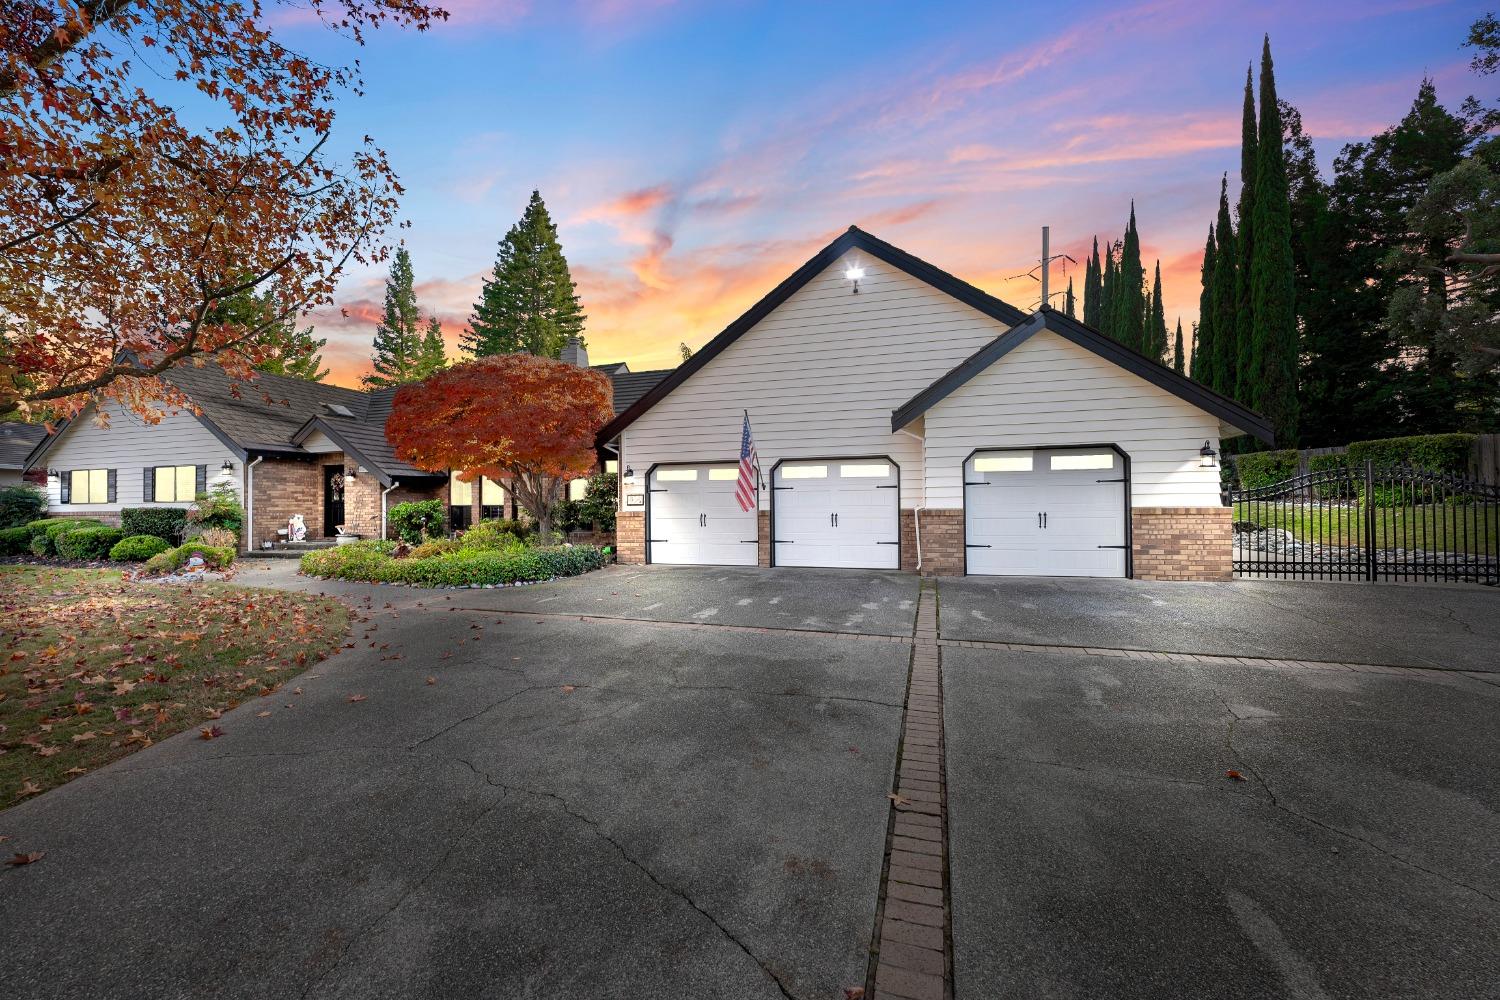 Photo of 8816 Country Creek Dr in Orangevale, CA